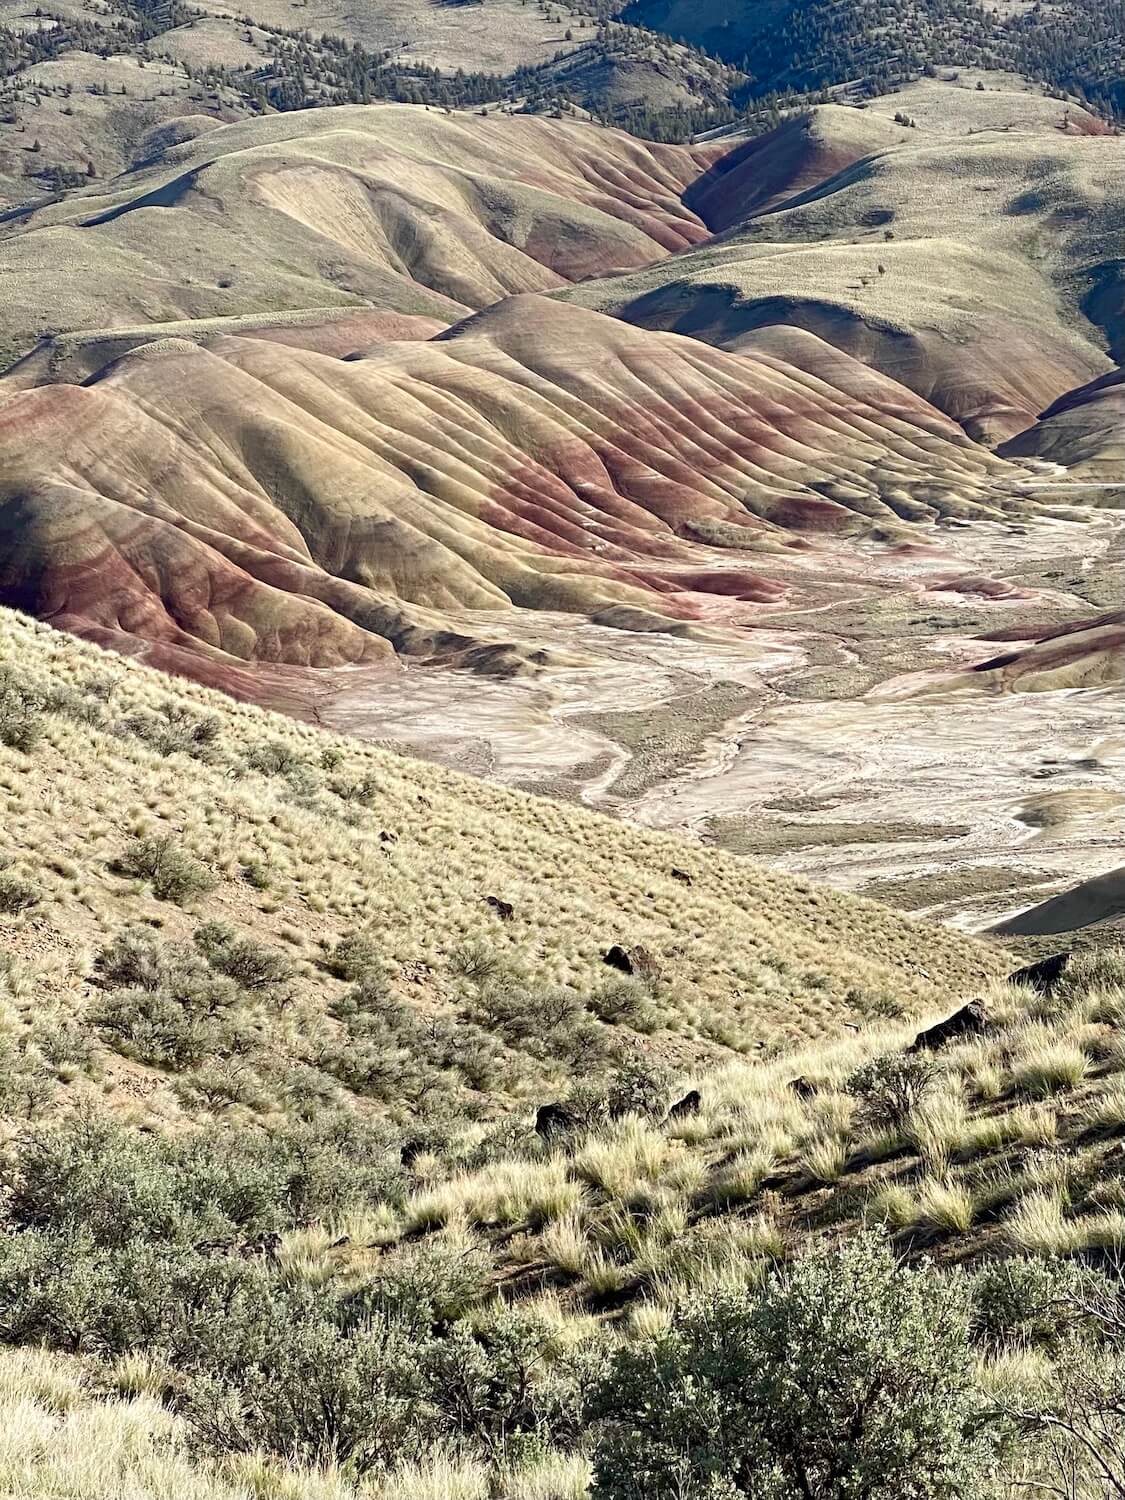 The flowing patterns of the Painted Ridge, with green, yellow and red make this photo pop out with inspiration.  the valley looks very dry while the small grasses and sage plants hold up the slope of the hill in the foreground. 